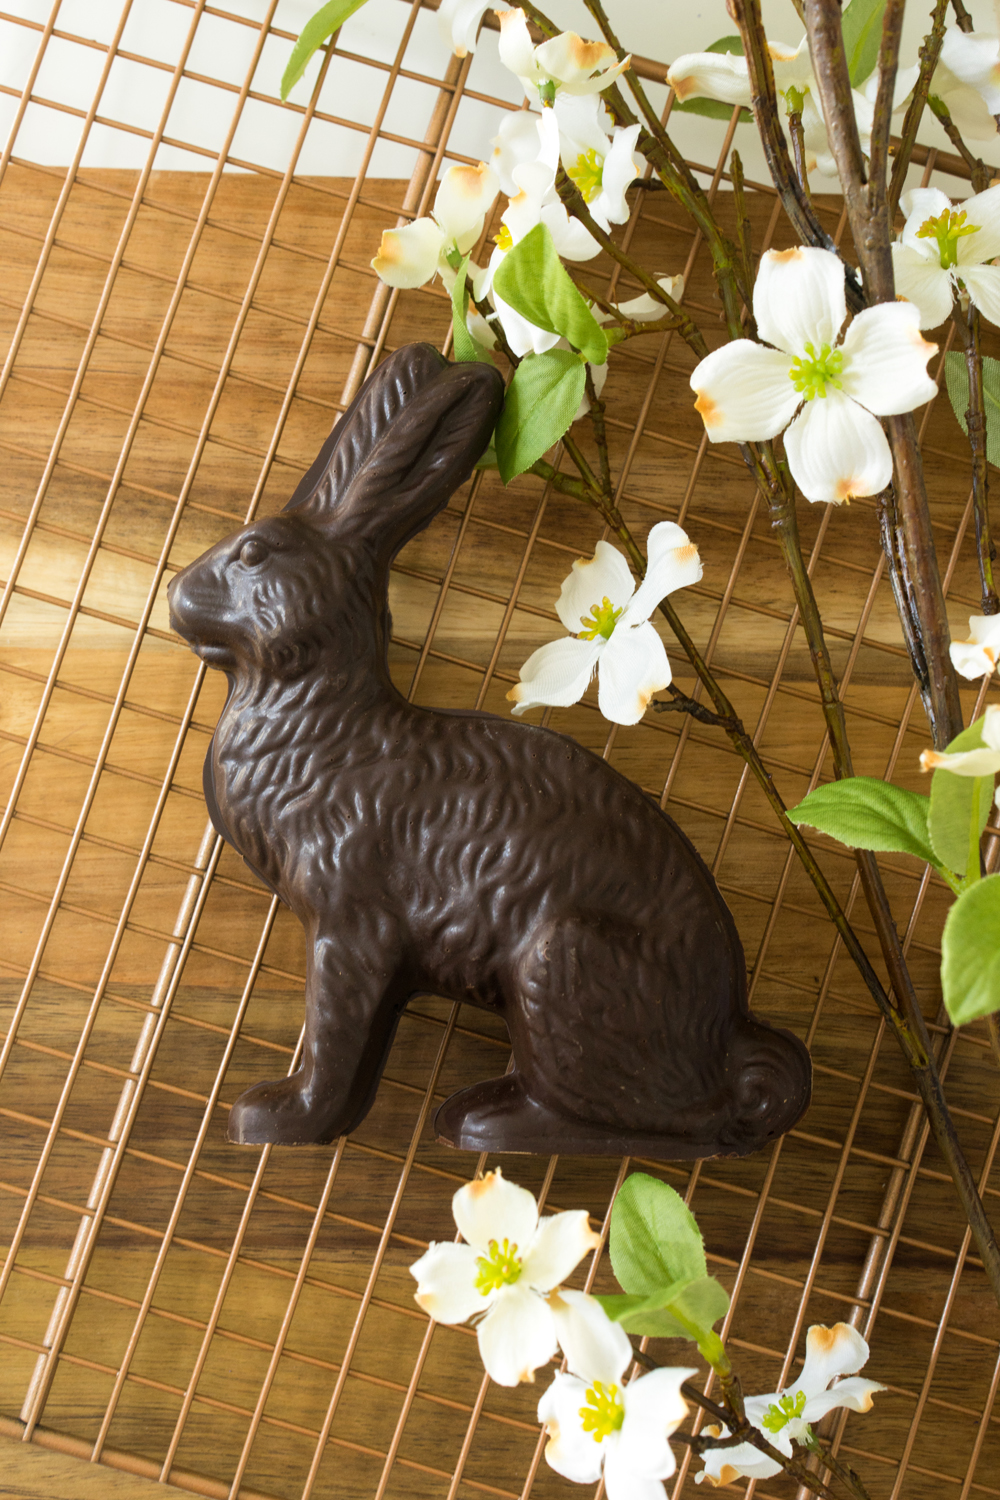 Easter bunny solid molded chocolate from Delysia Chocolatier